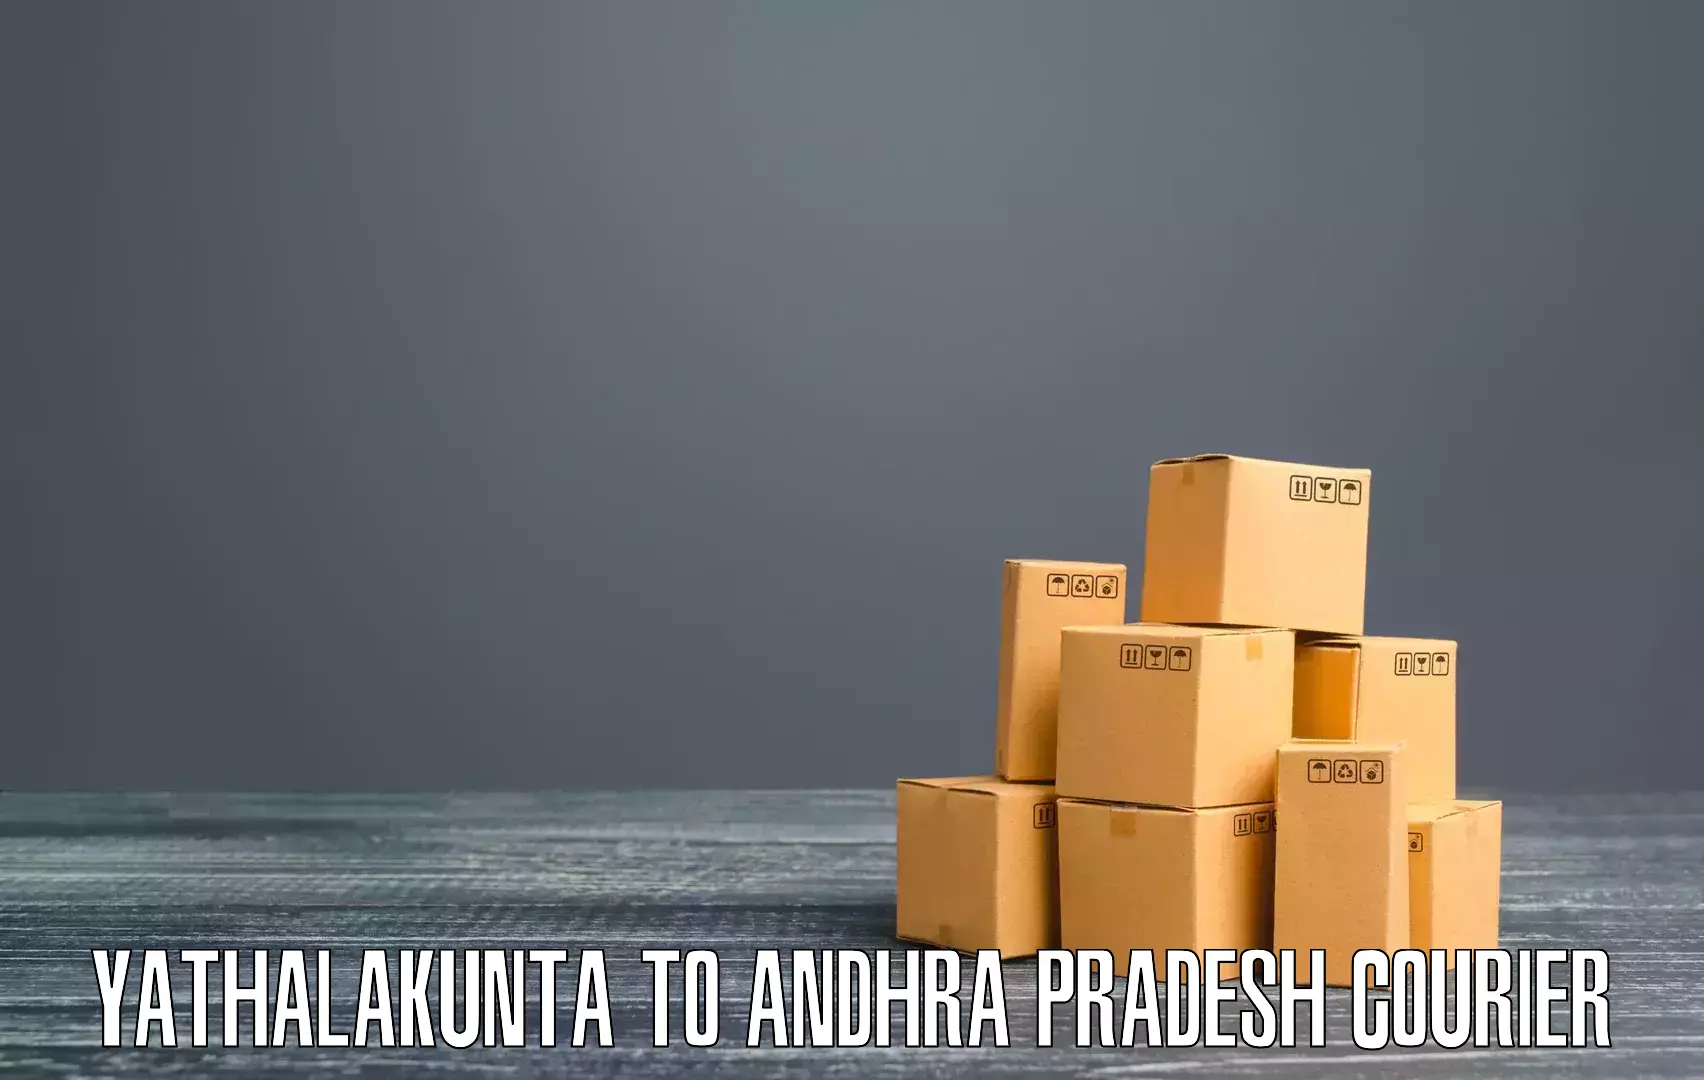 International courier networks Yathalakunta to Gooty